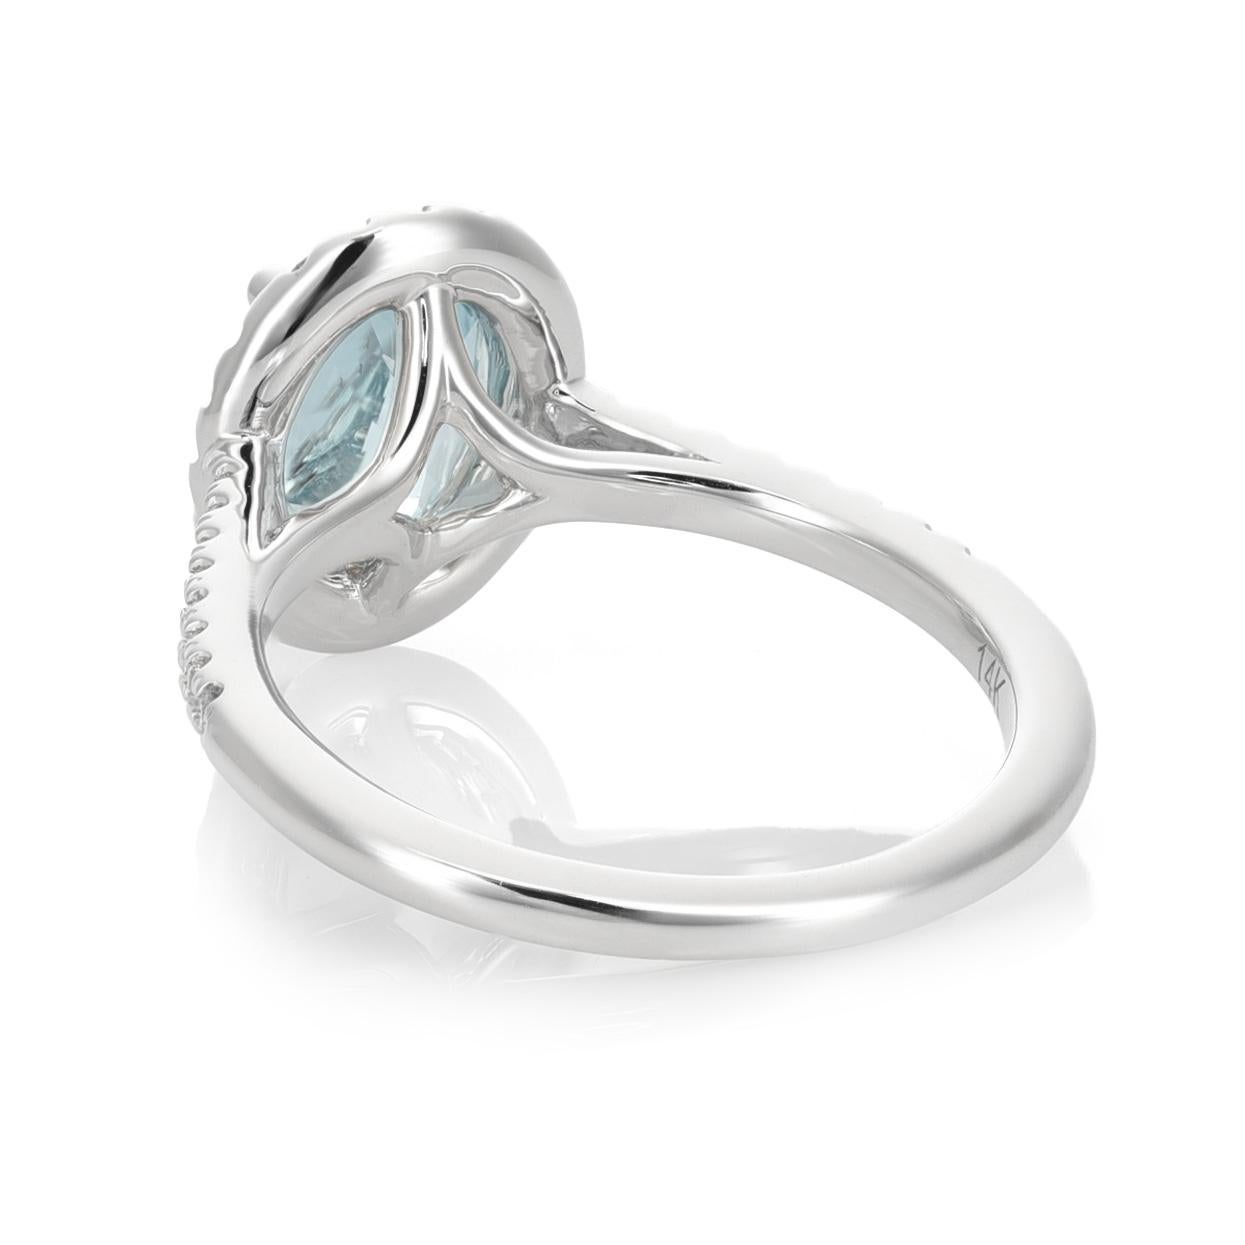 Mixed Cut 1.75 Carats Natural Aquamarine Diamonds set in 14K White Gold Ring For Sale